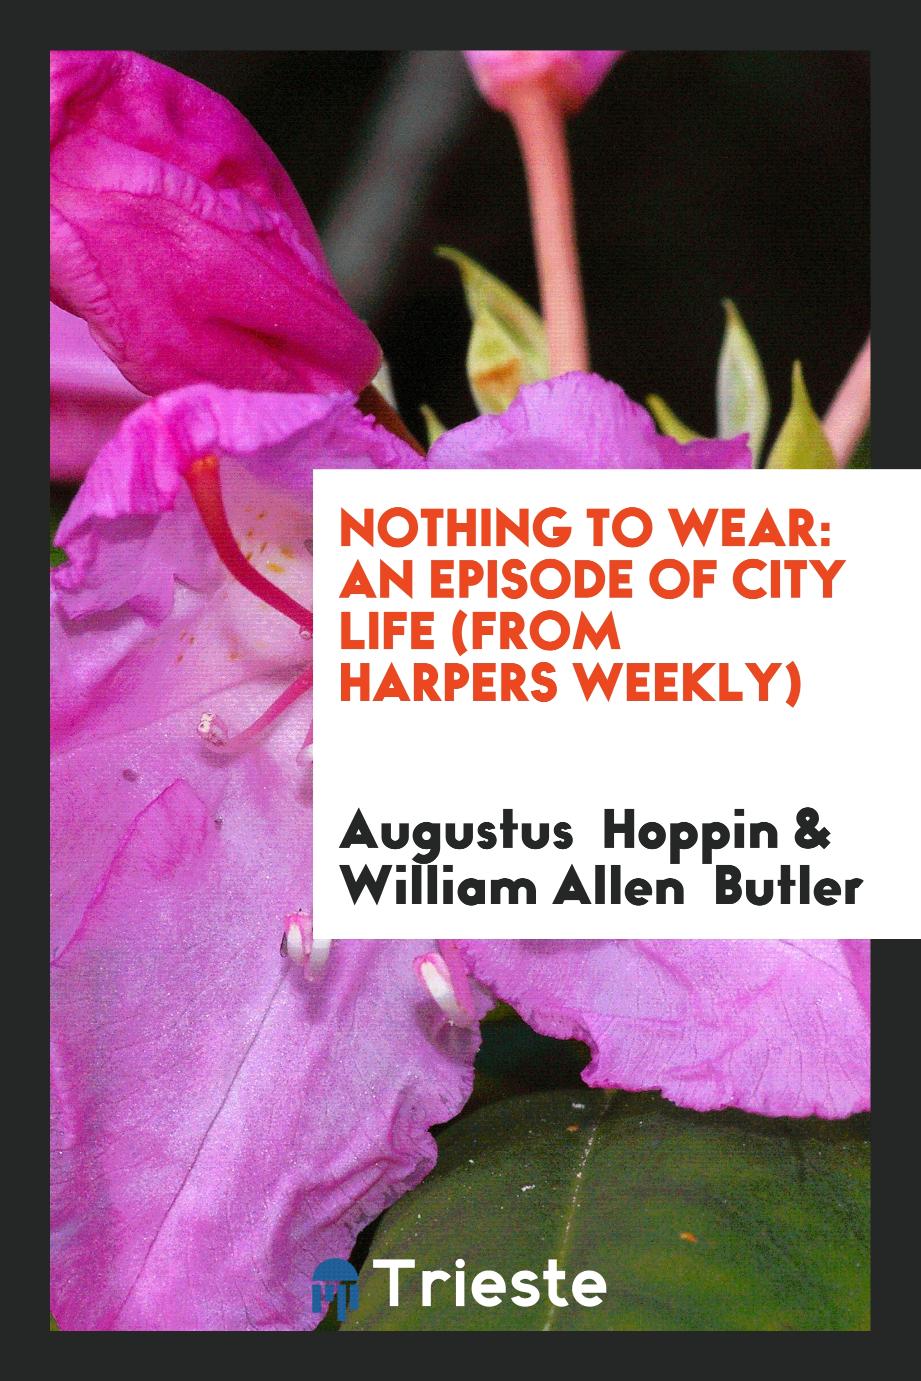 Nothing to wear: an episode of city life (from Harpers weekly)